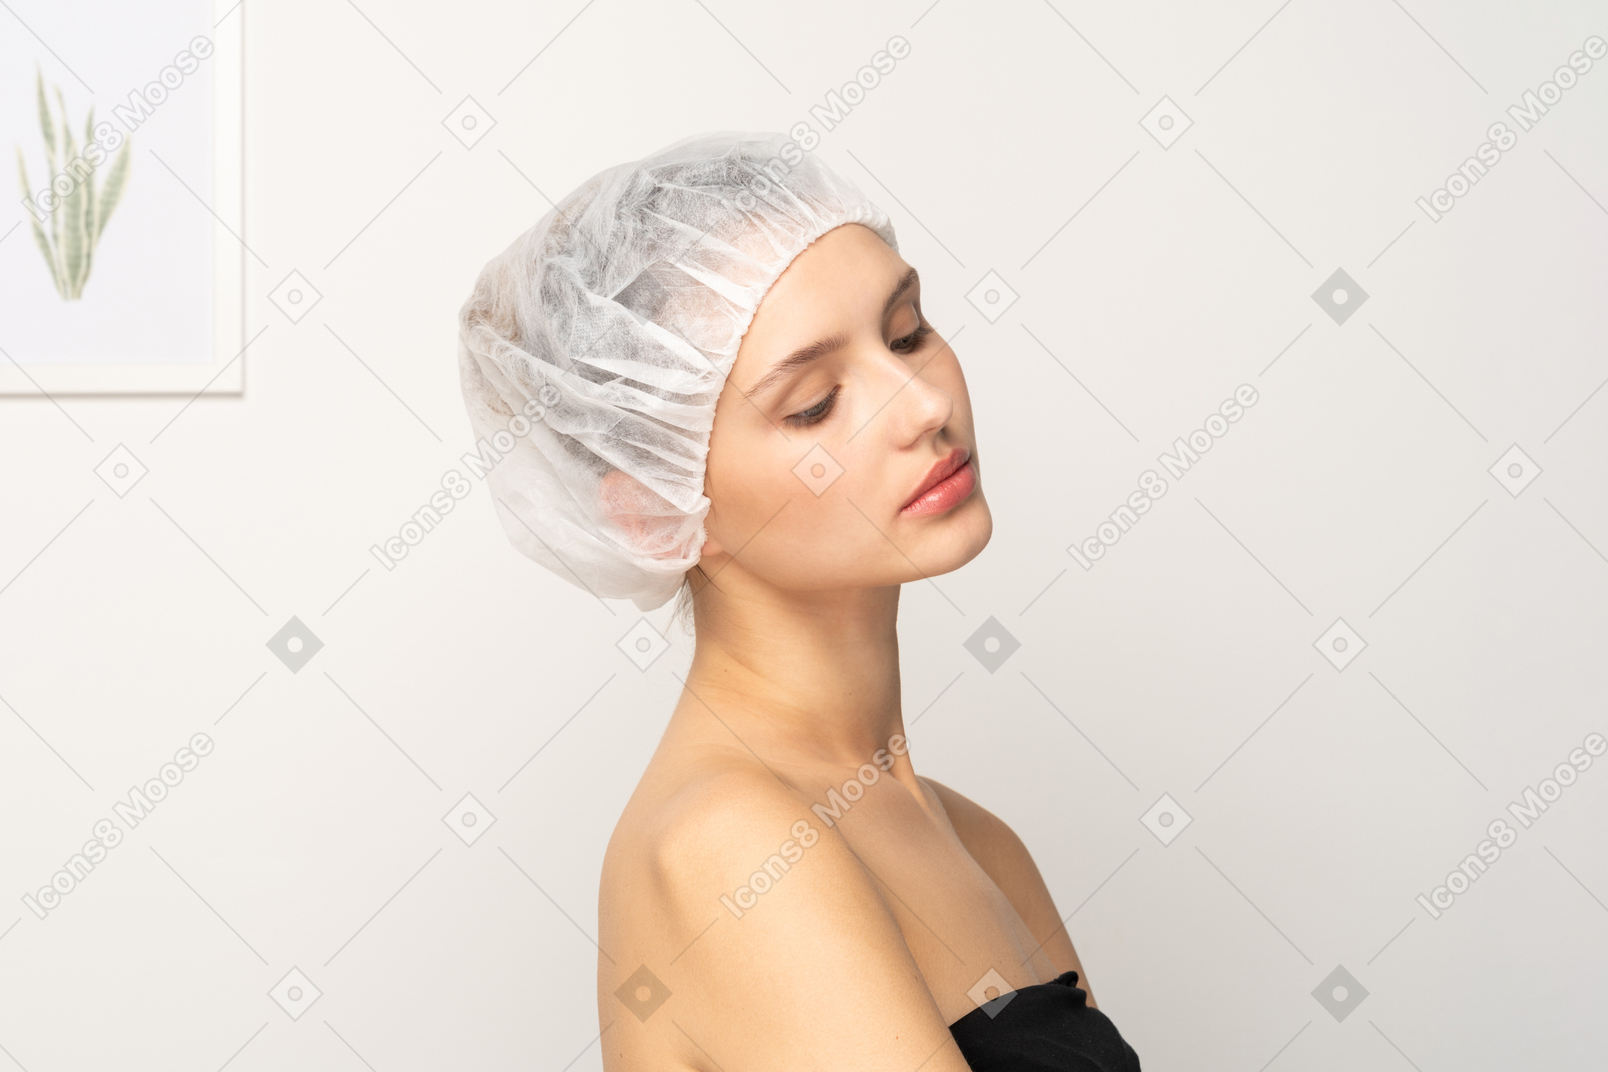 Portrait of young female patient in medical cap looking down